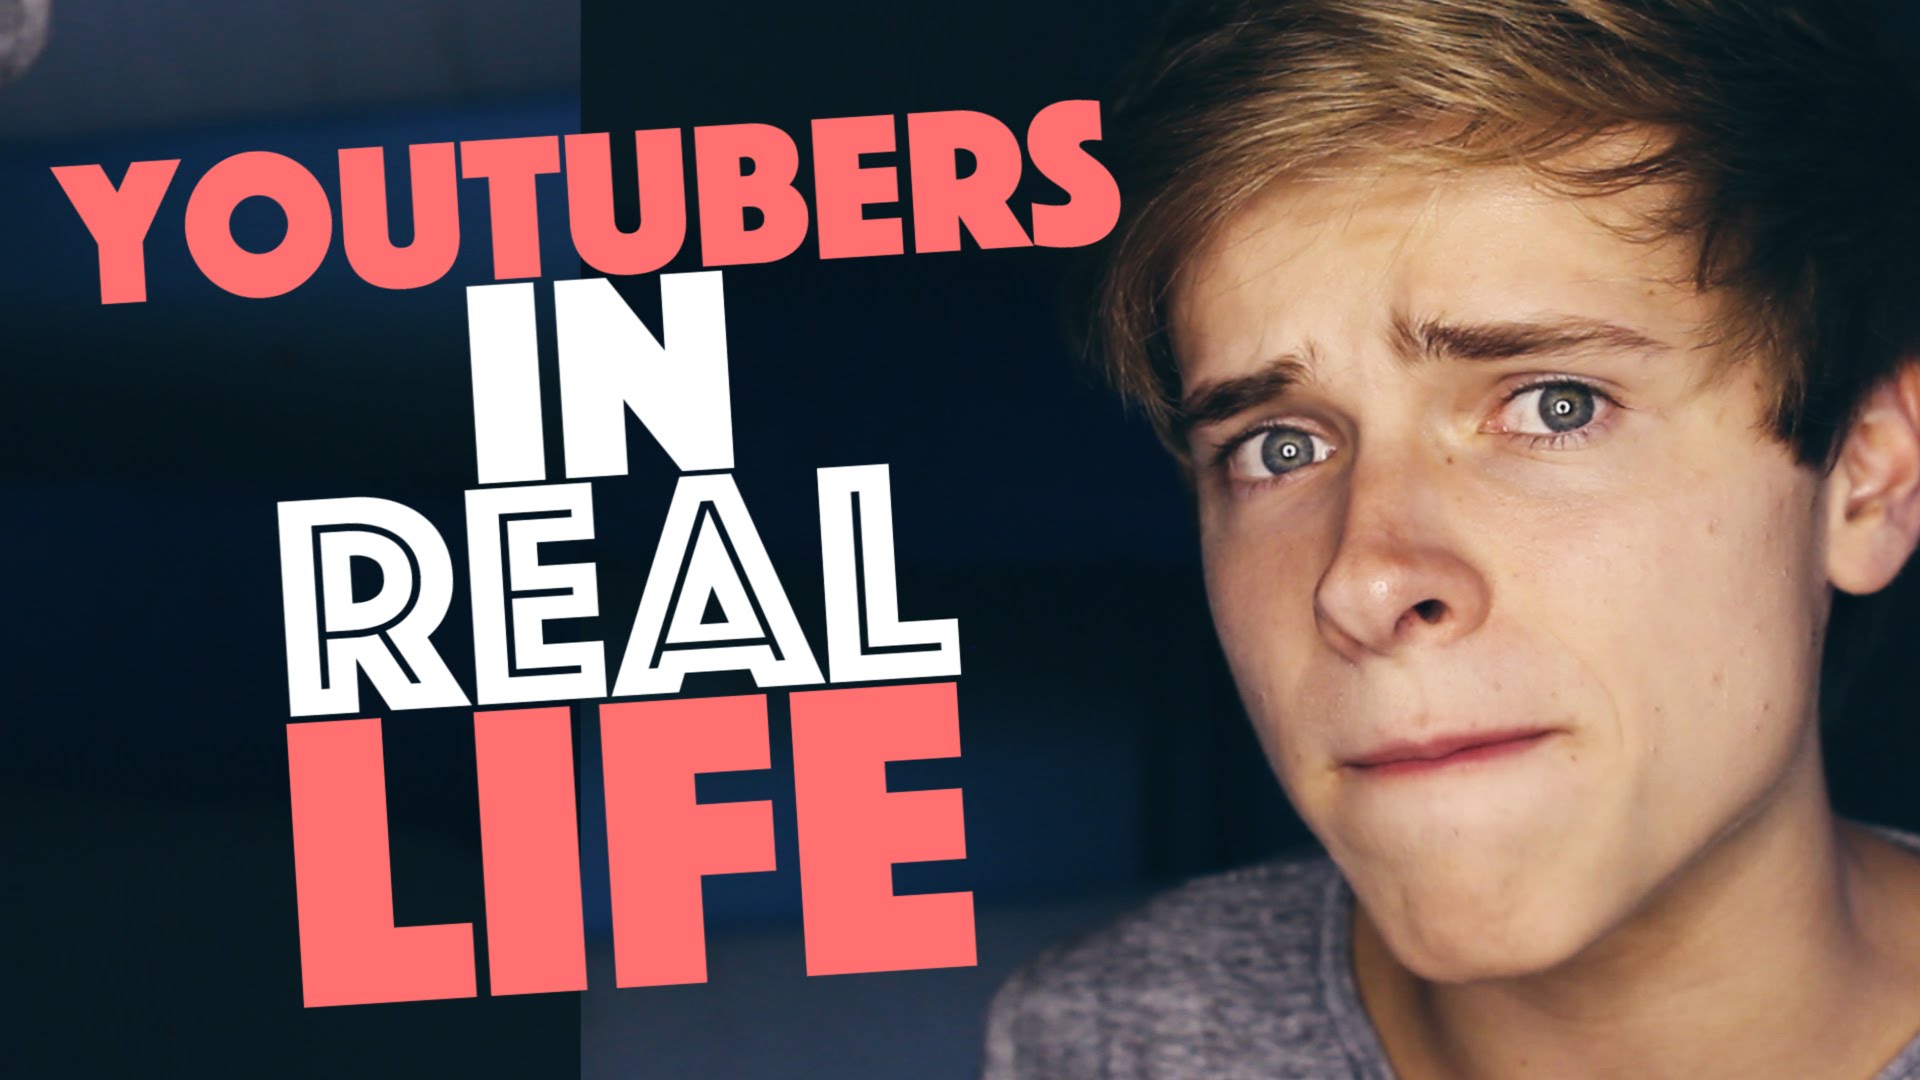 YOUTUBERS IN REAL LIFE - YouTube